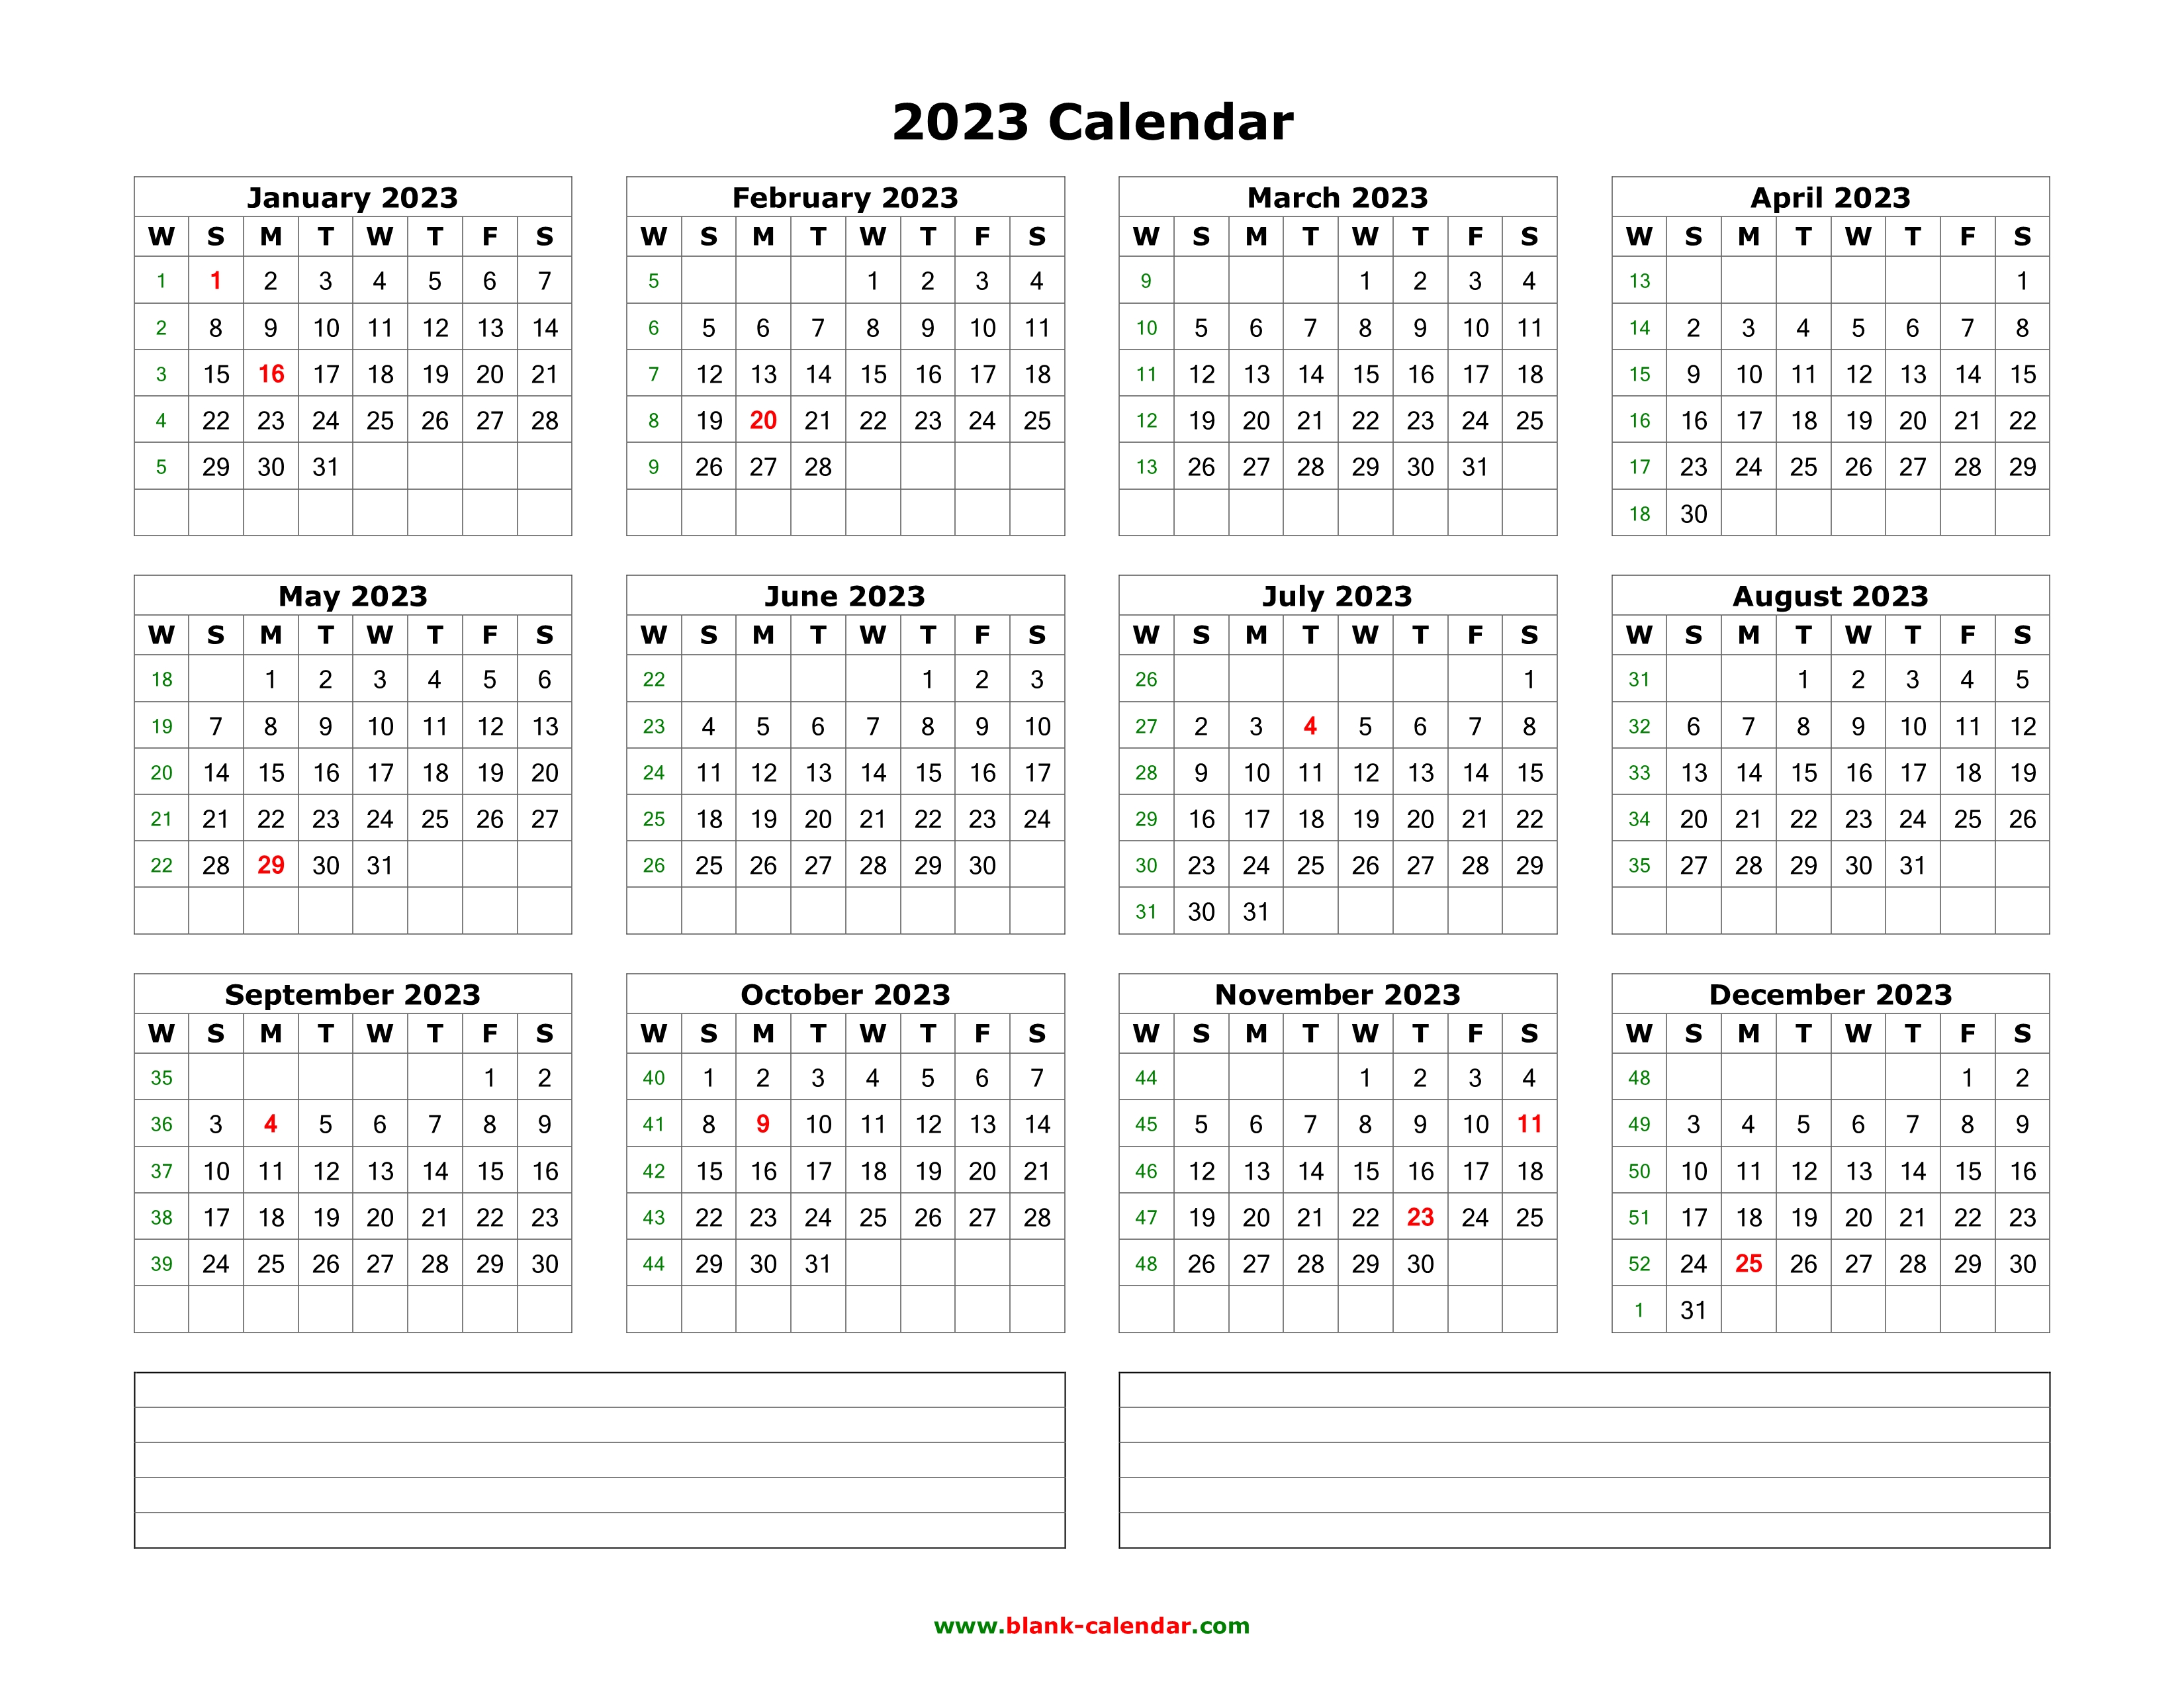 download blank calendar 2023 with space for notes 12 months on one page horizontal